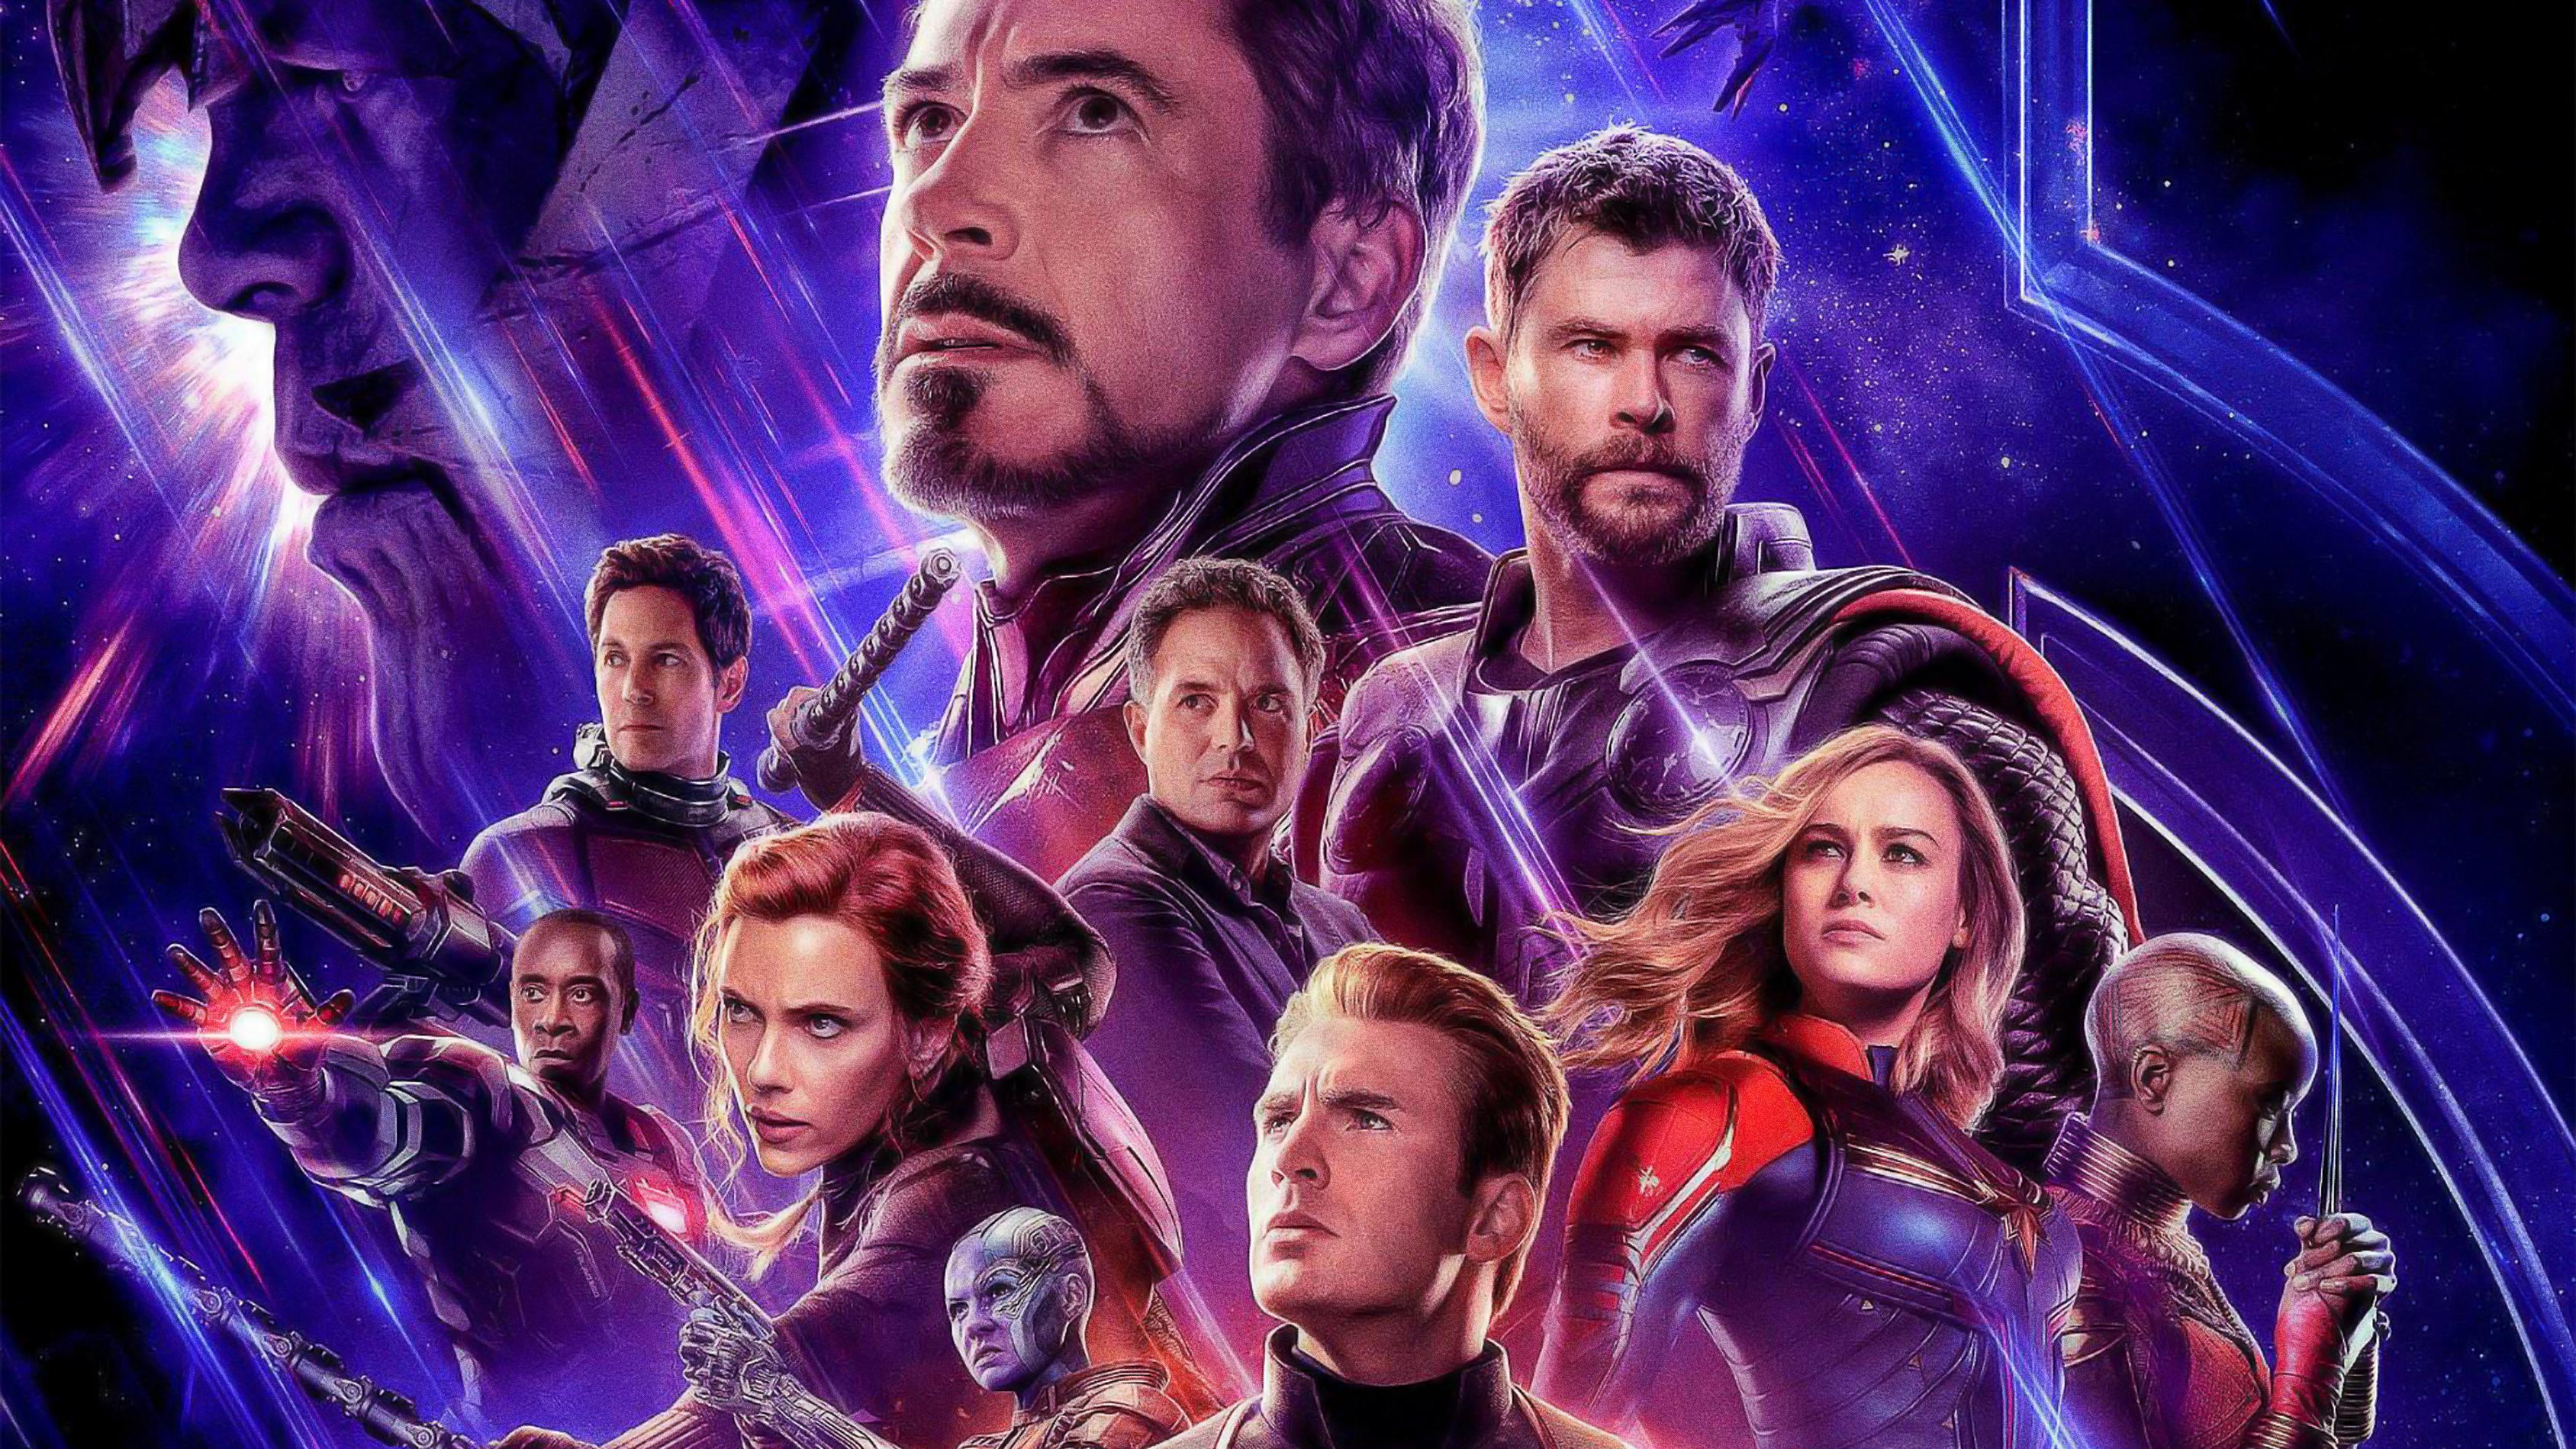 Avengers Endgame 2019 Official Poster, HD Movies, 4k